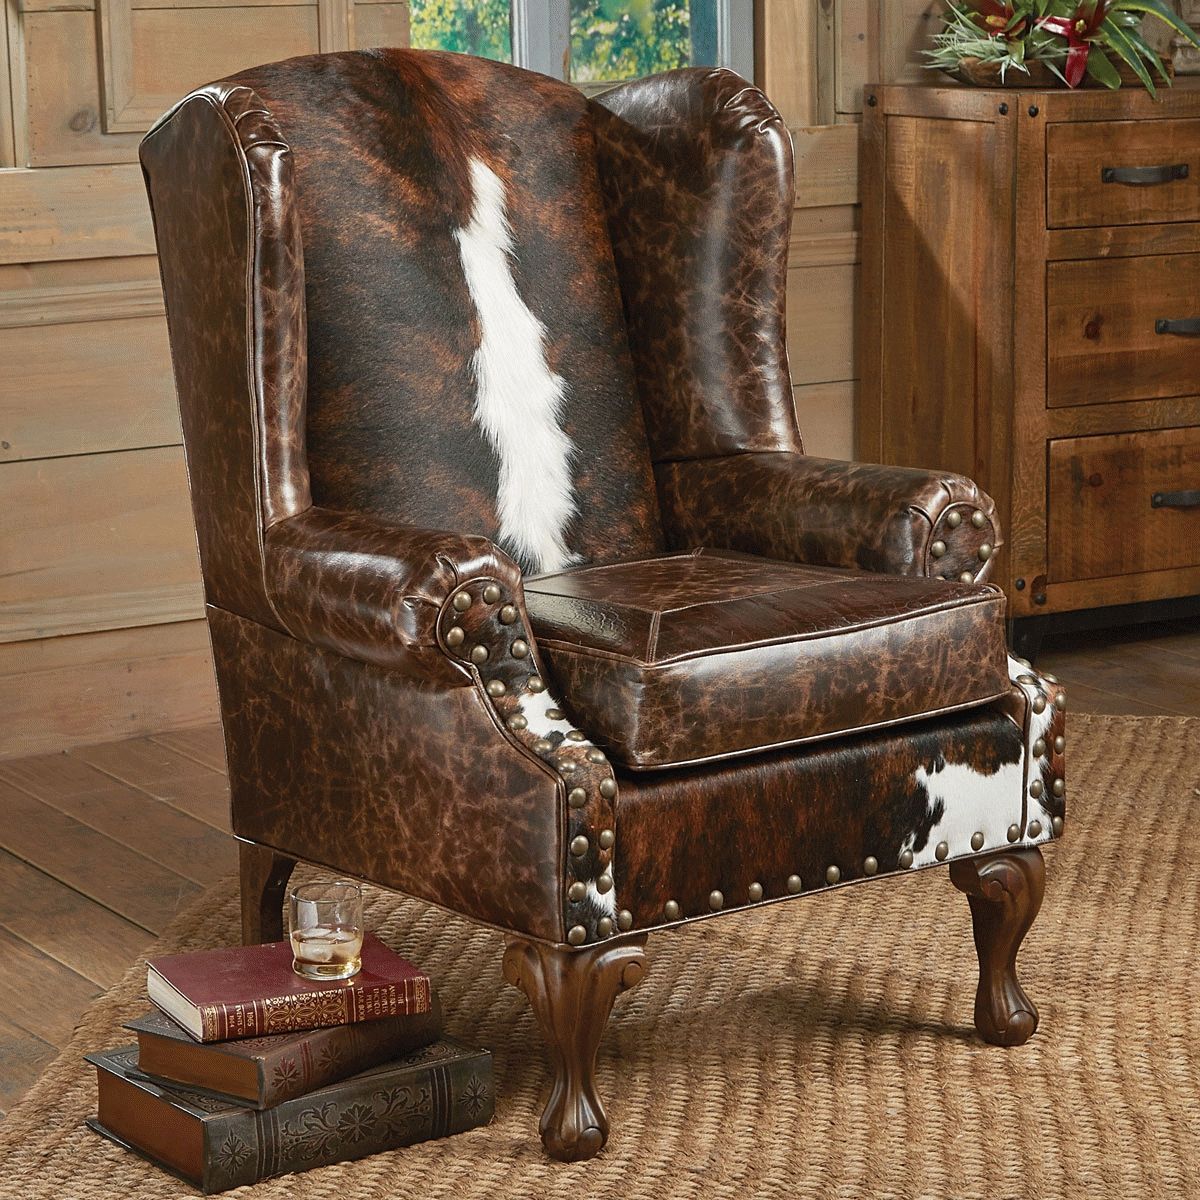 Western Leather Furniture & Cowboy Furnishings From Lones Star Regarding Cowhide Sofas (View 4 of 15)